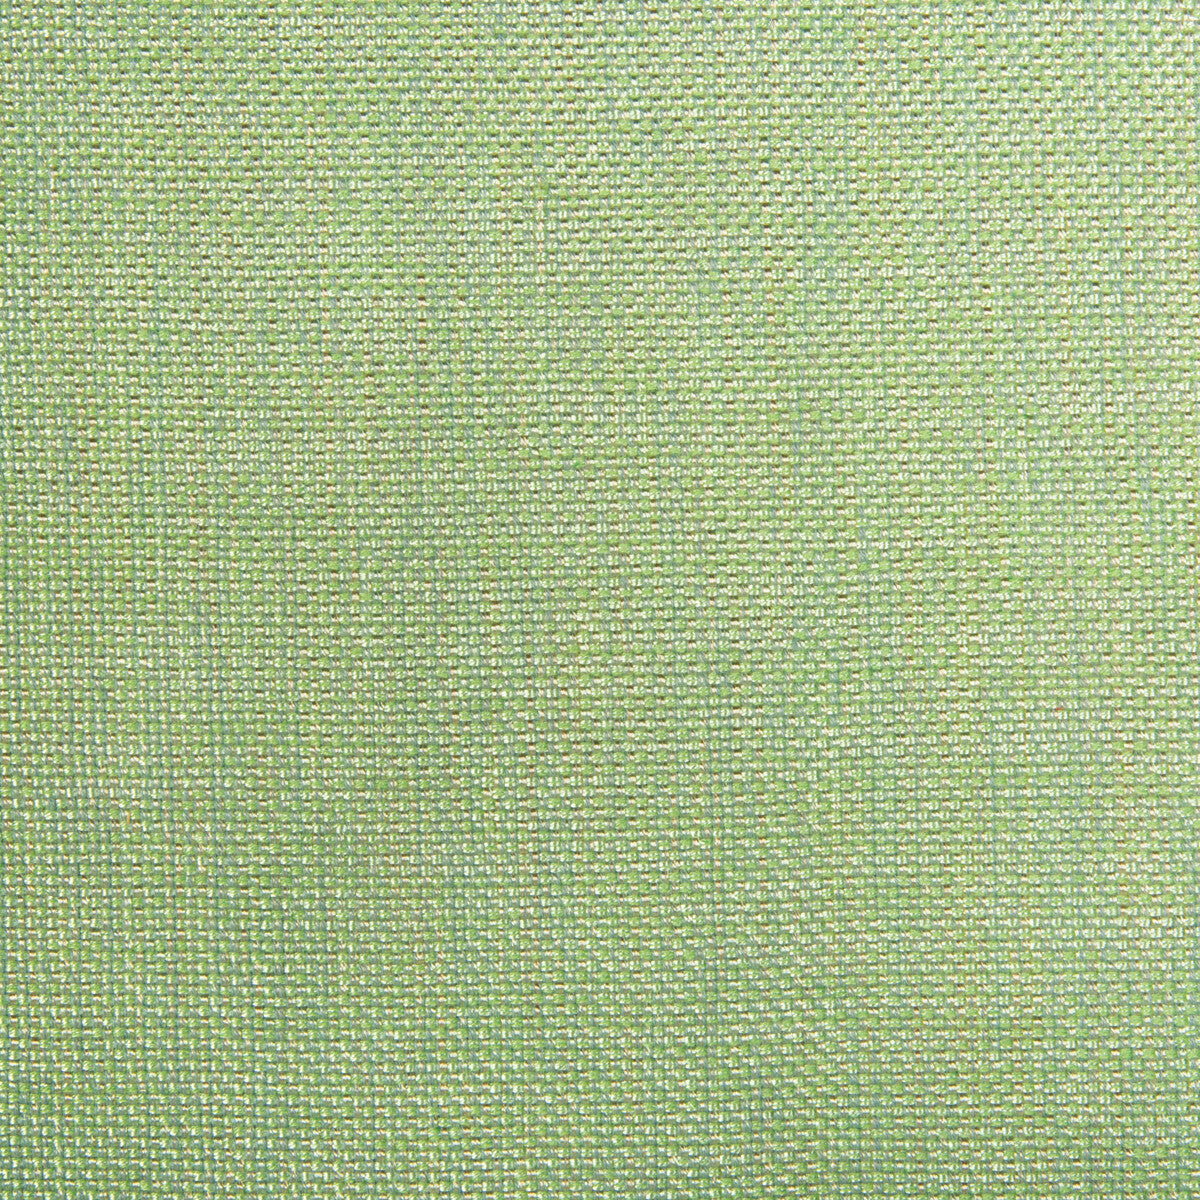 Kravet Contract fabric in 34926-123 color - pattern 34926.123.0 - by Kravet Contract